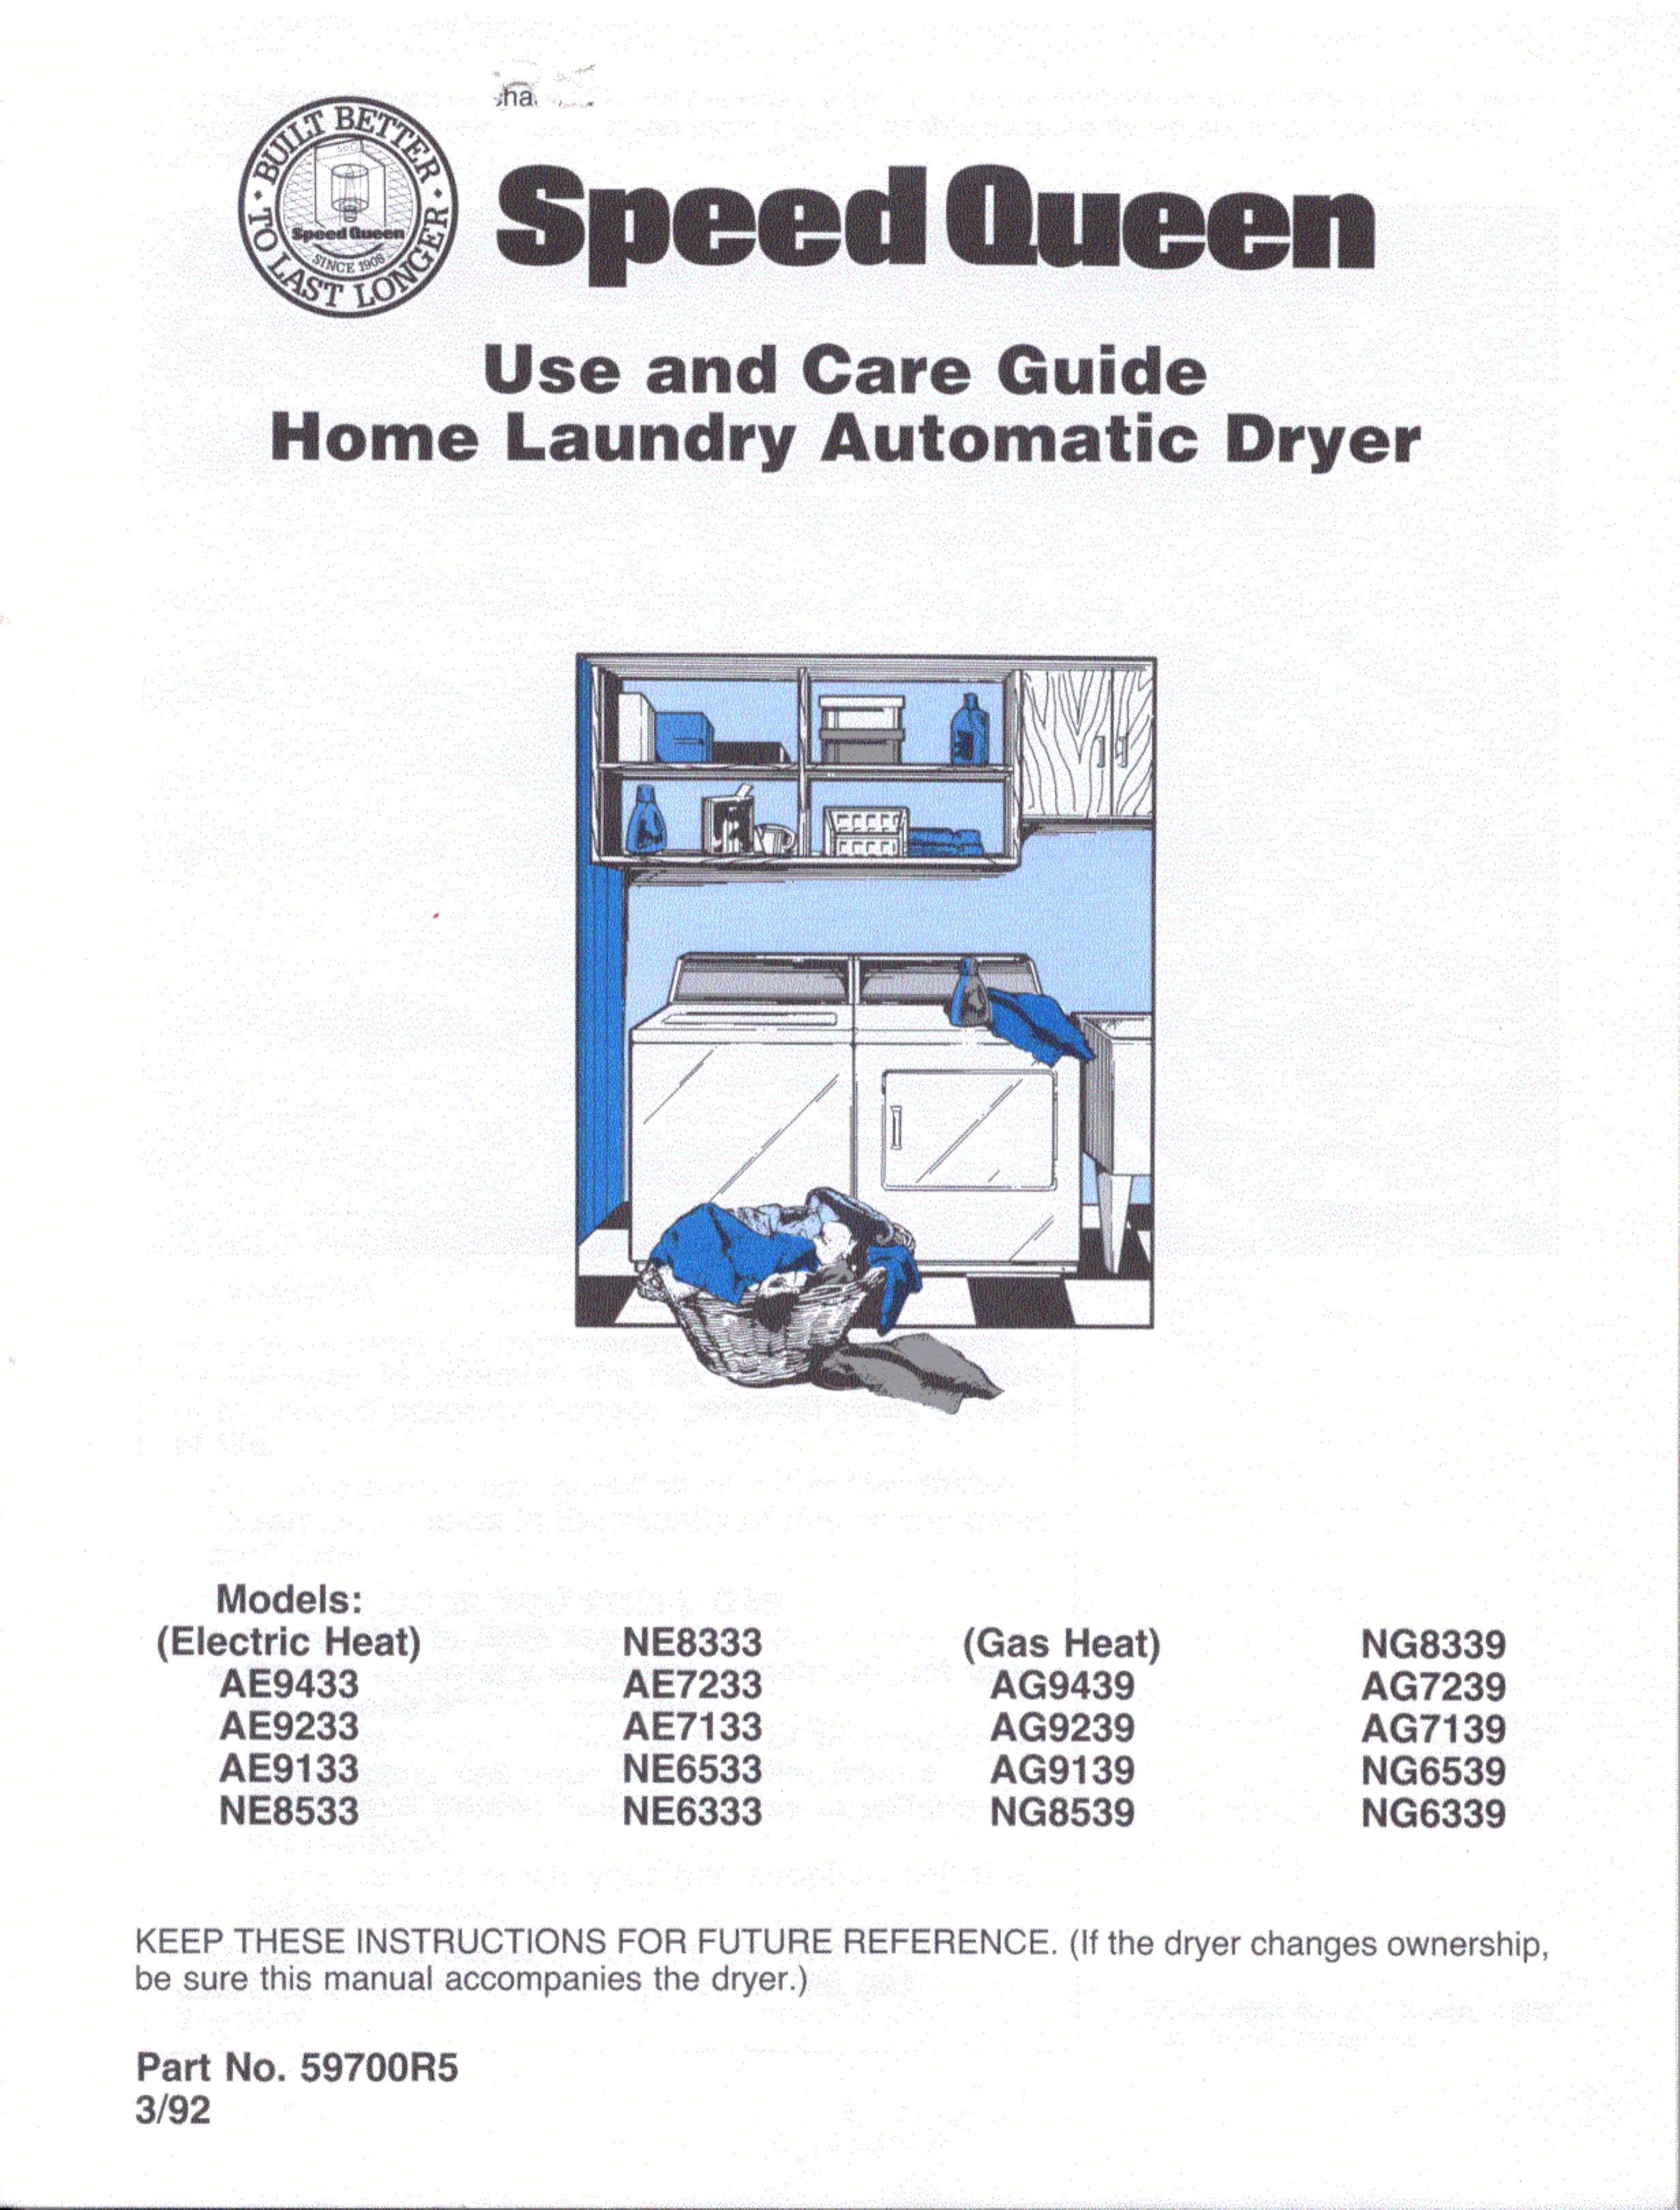 Speed Queen AE7133 Clothes Dryer User Manual